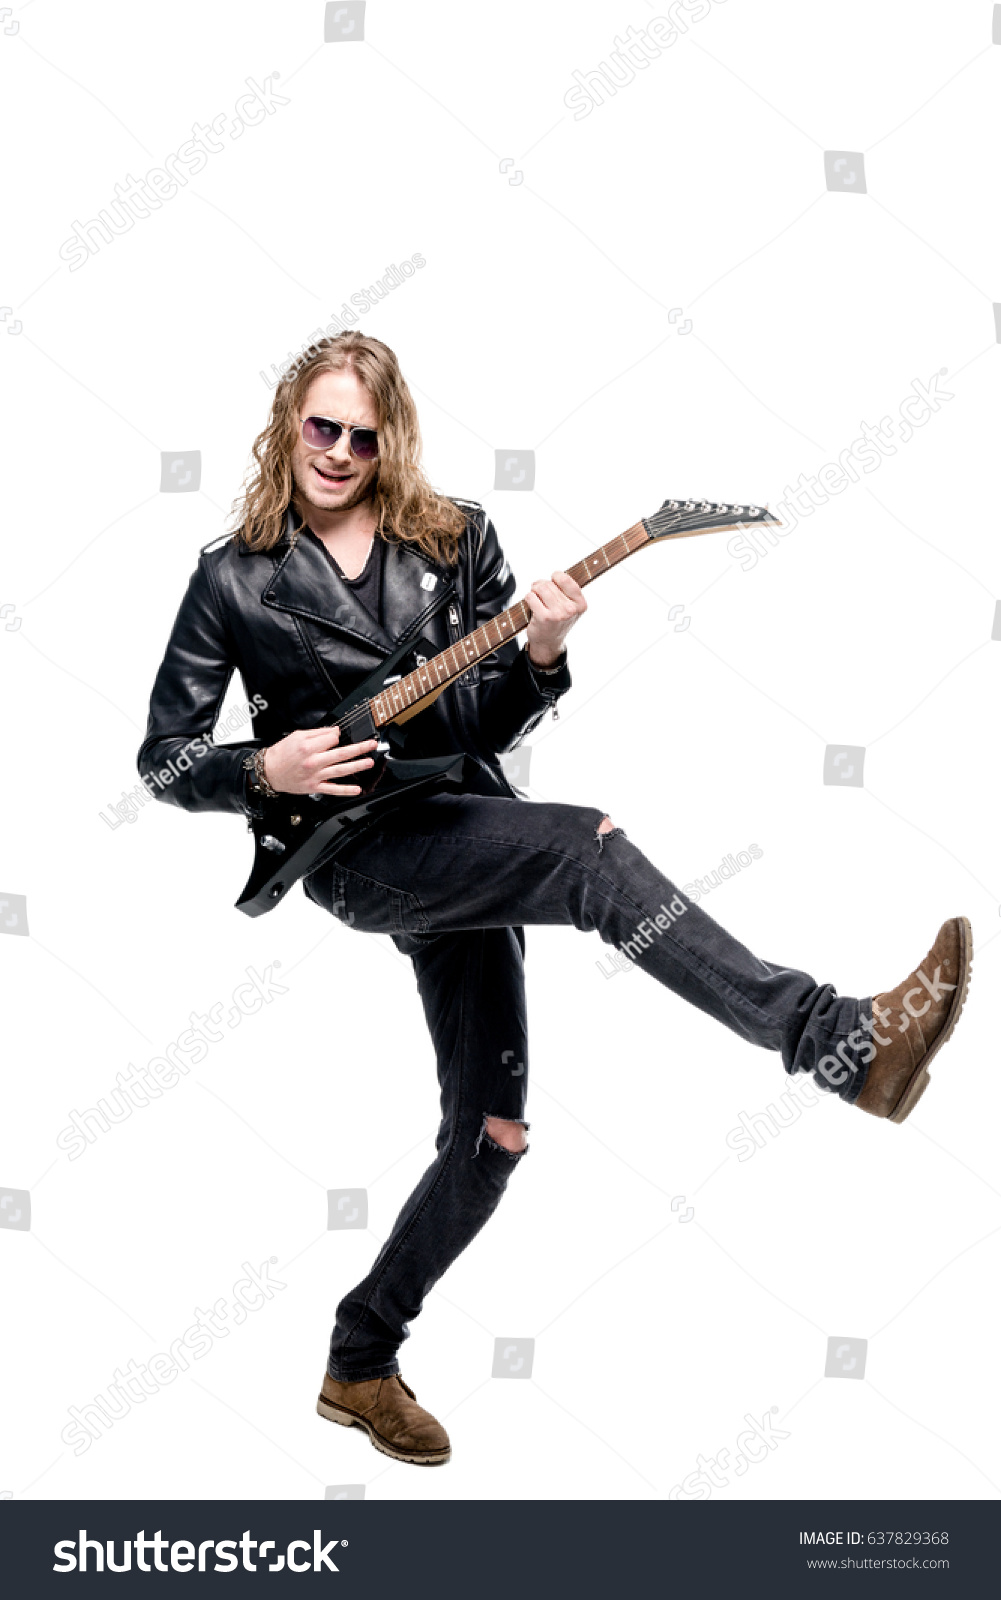 handsome rocker in sunglasses posing playing electric guitar isolated on white, rock star guitar concept #637829368